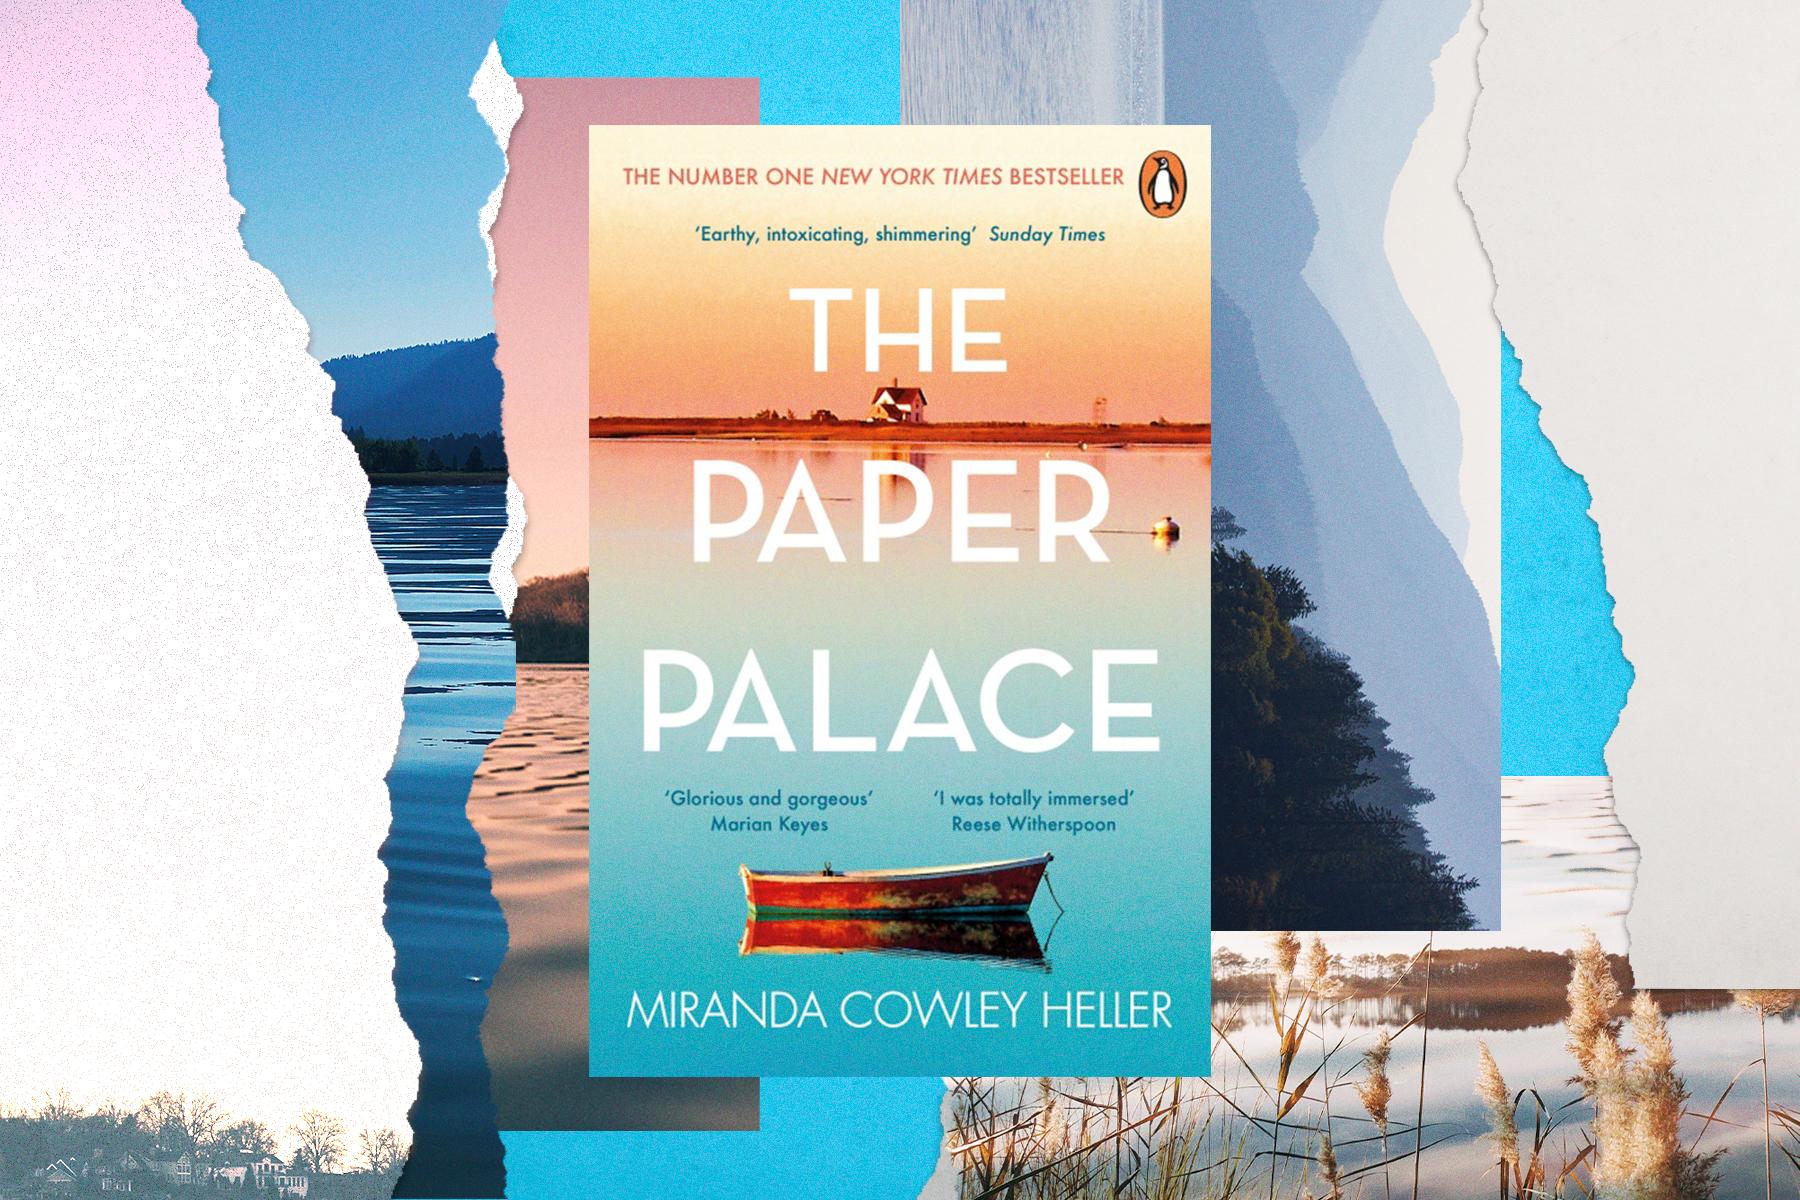 An image of the cover of The Paper Palace against a backdrop of ripped paper